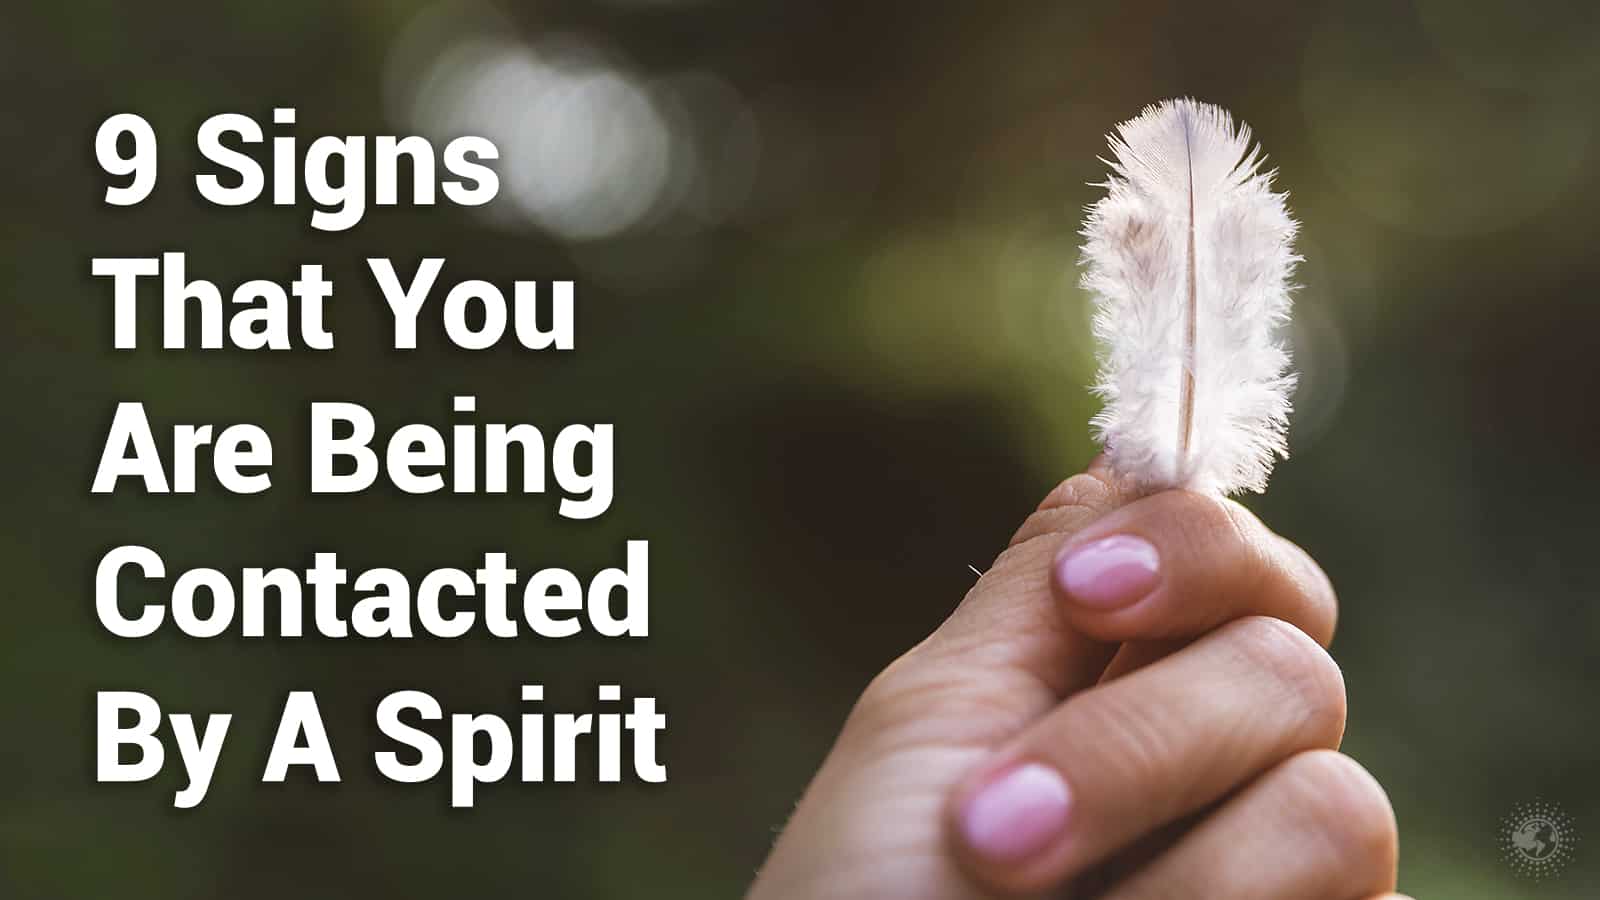 9 Signs That You Are Being Contacted By A Spirit